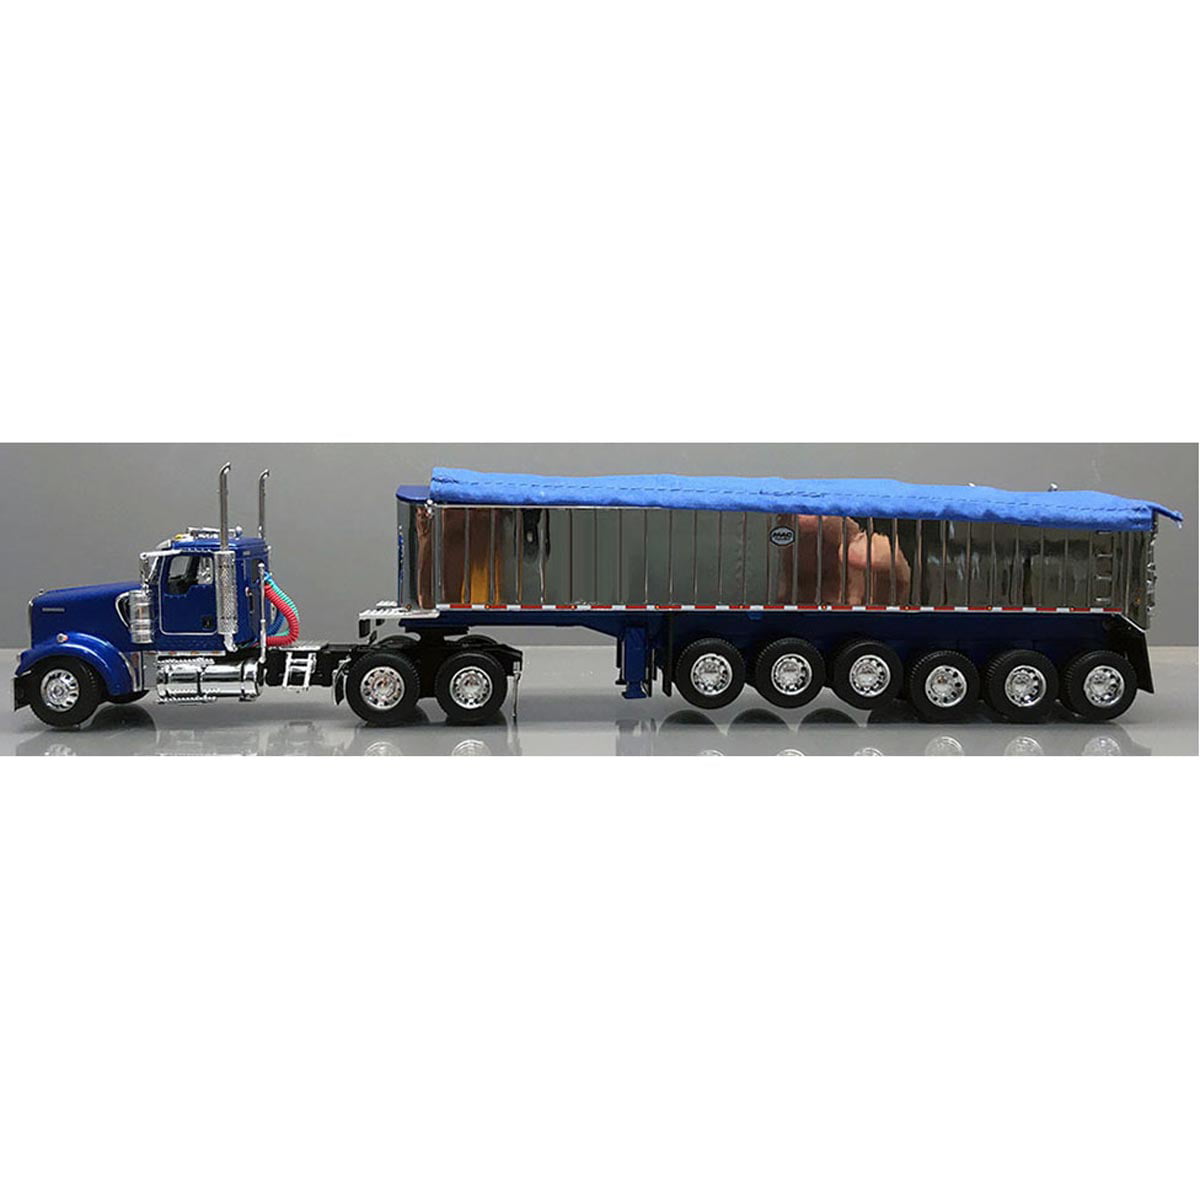 DCP KENWORTH BLK T-800 DAY CAB WITH 6 AXLE MAC CHROME COAL END DUMP 1/64 60-0759 